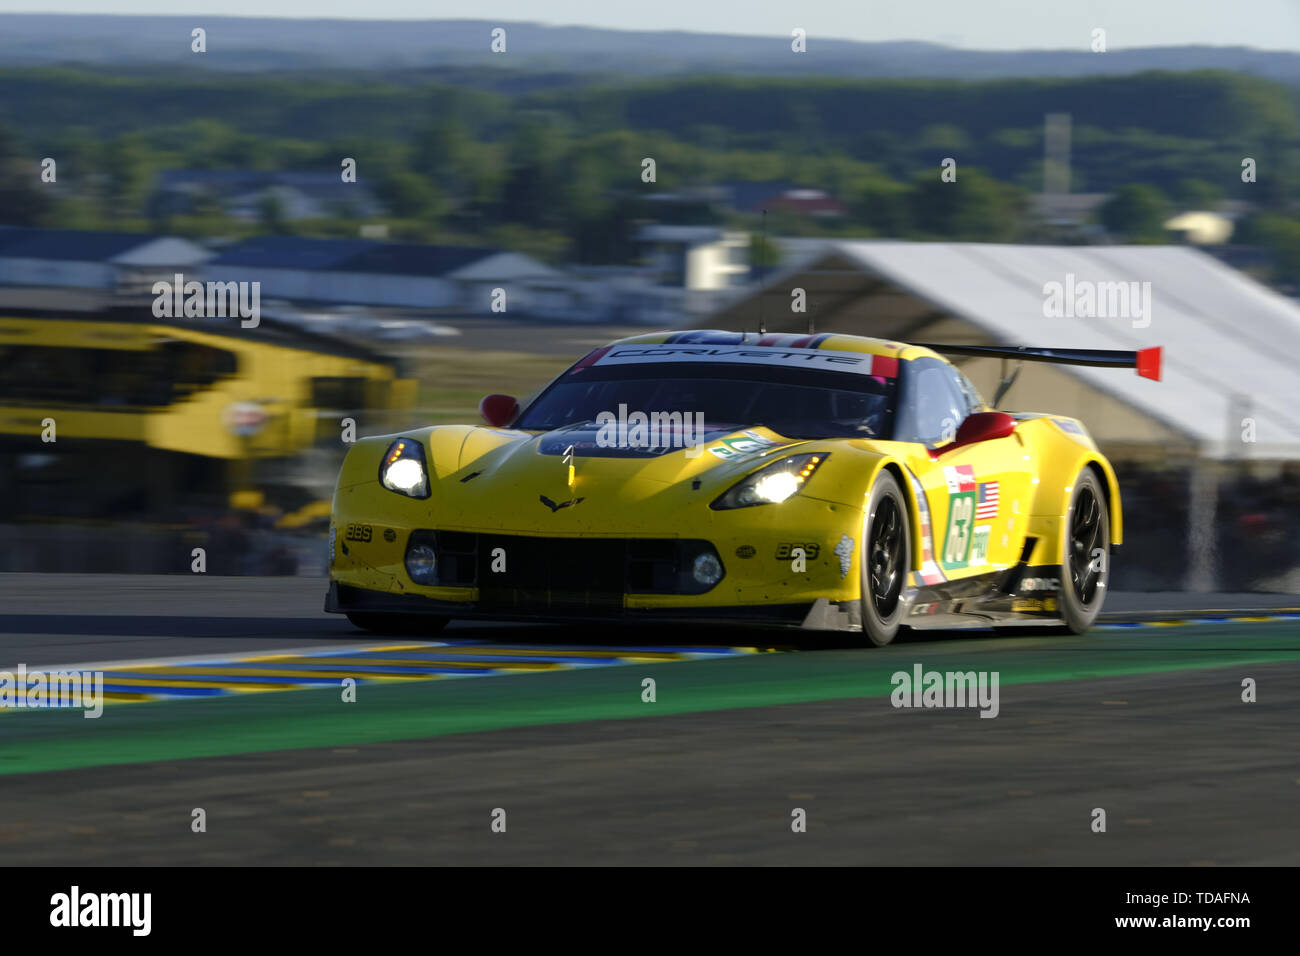 Le Mans, Sarthe, France. 13th June, 2019. Corvette Racing GM USA Chevrolet Corvette C7.R rider MIKE ROCKENFELLER(GER) in action during the 87th edition of the 24 hours of Le Mans the last round of the FIA World Endurance Championship at the Sarthe circuit at Le Mans - France Credit: Pierre Stevenin/ZUMA Wire/Alamy Live News Stock Photo